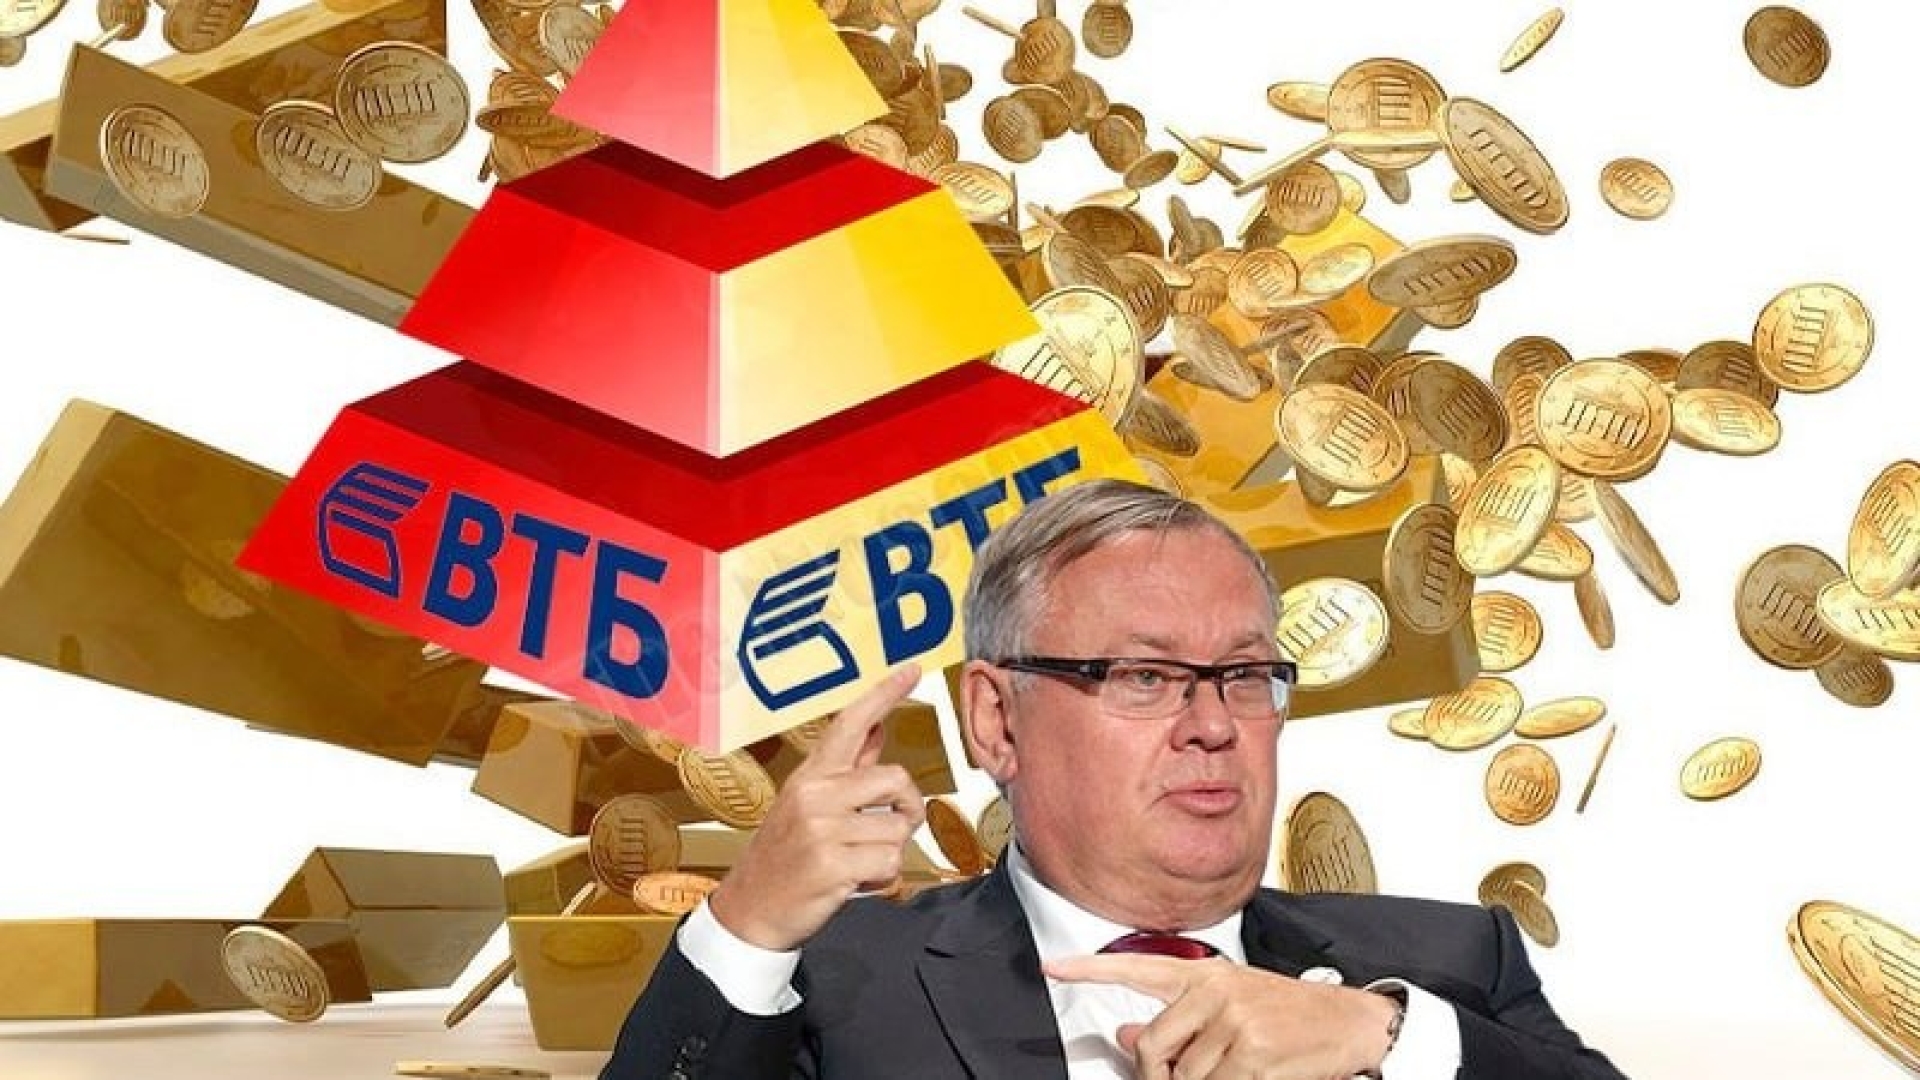 And VTB is not enough for a whole: Andrei Kostin announced a new "crusade" for money